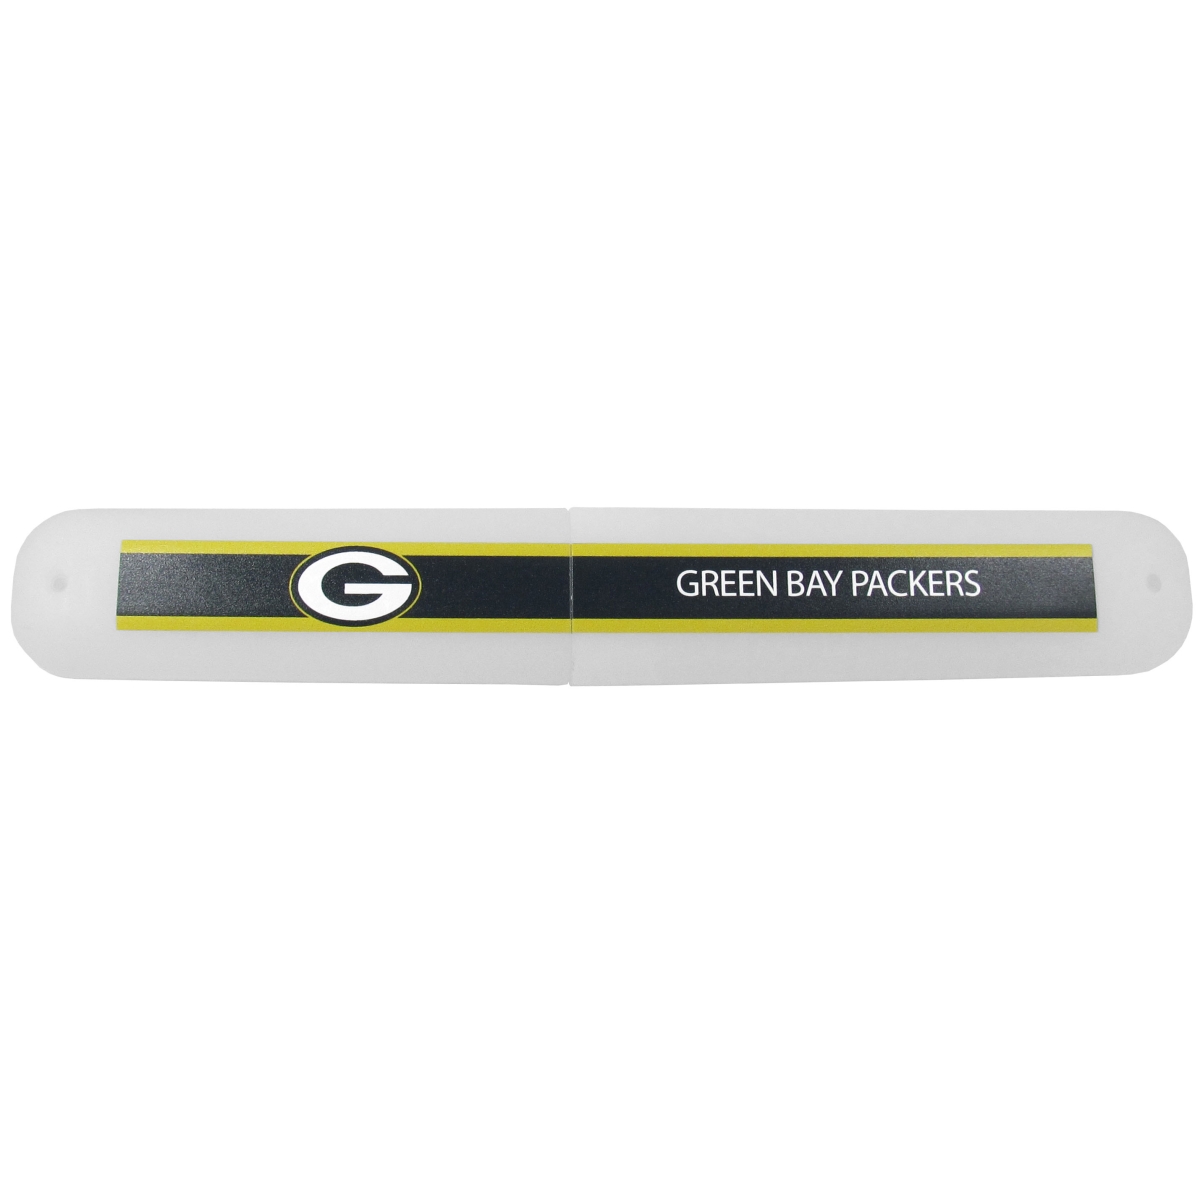 Picture of Siskiyou FTBC115 Unisex NFL Green Bay Packers Travel Toothbrush Case - One Size